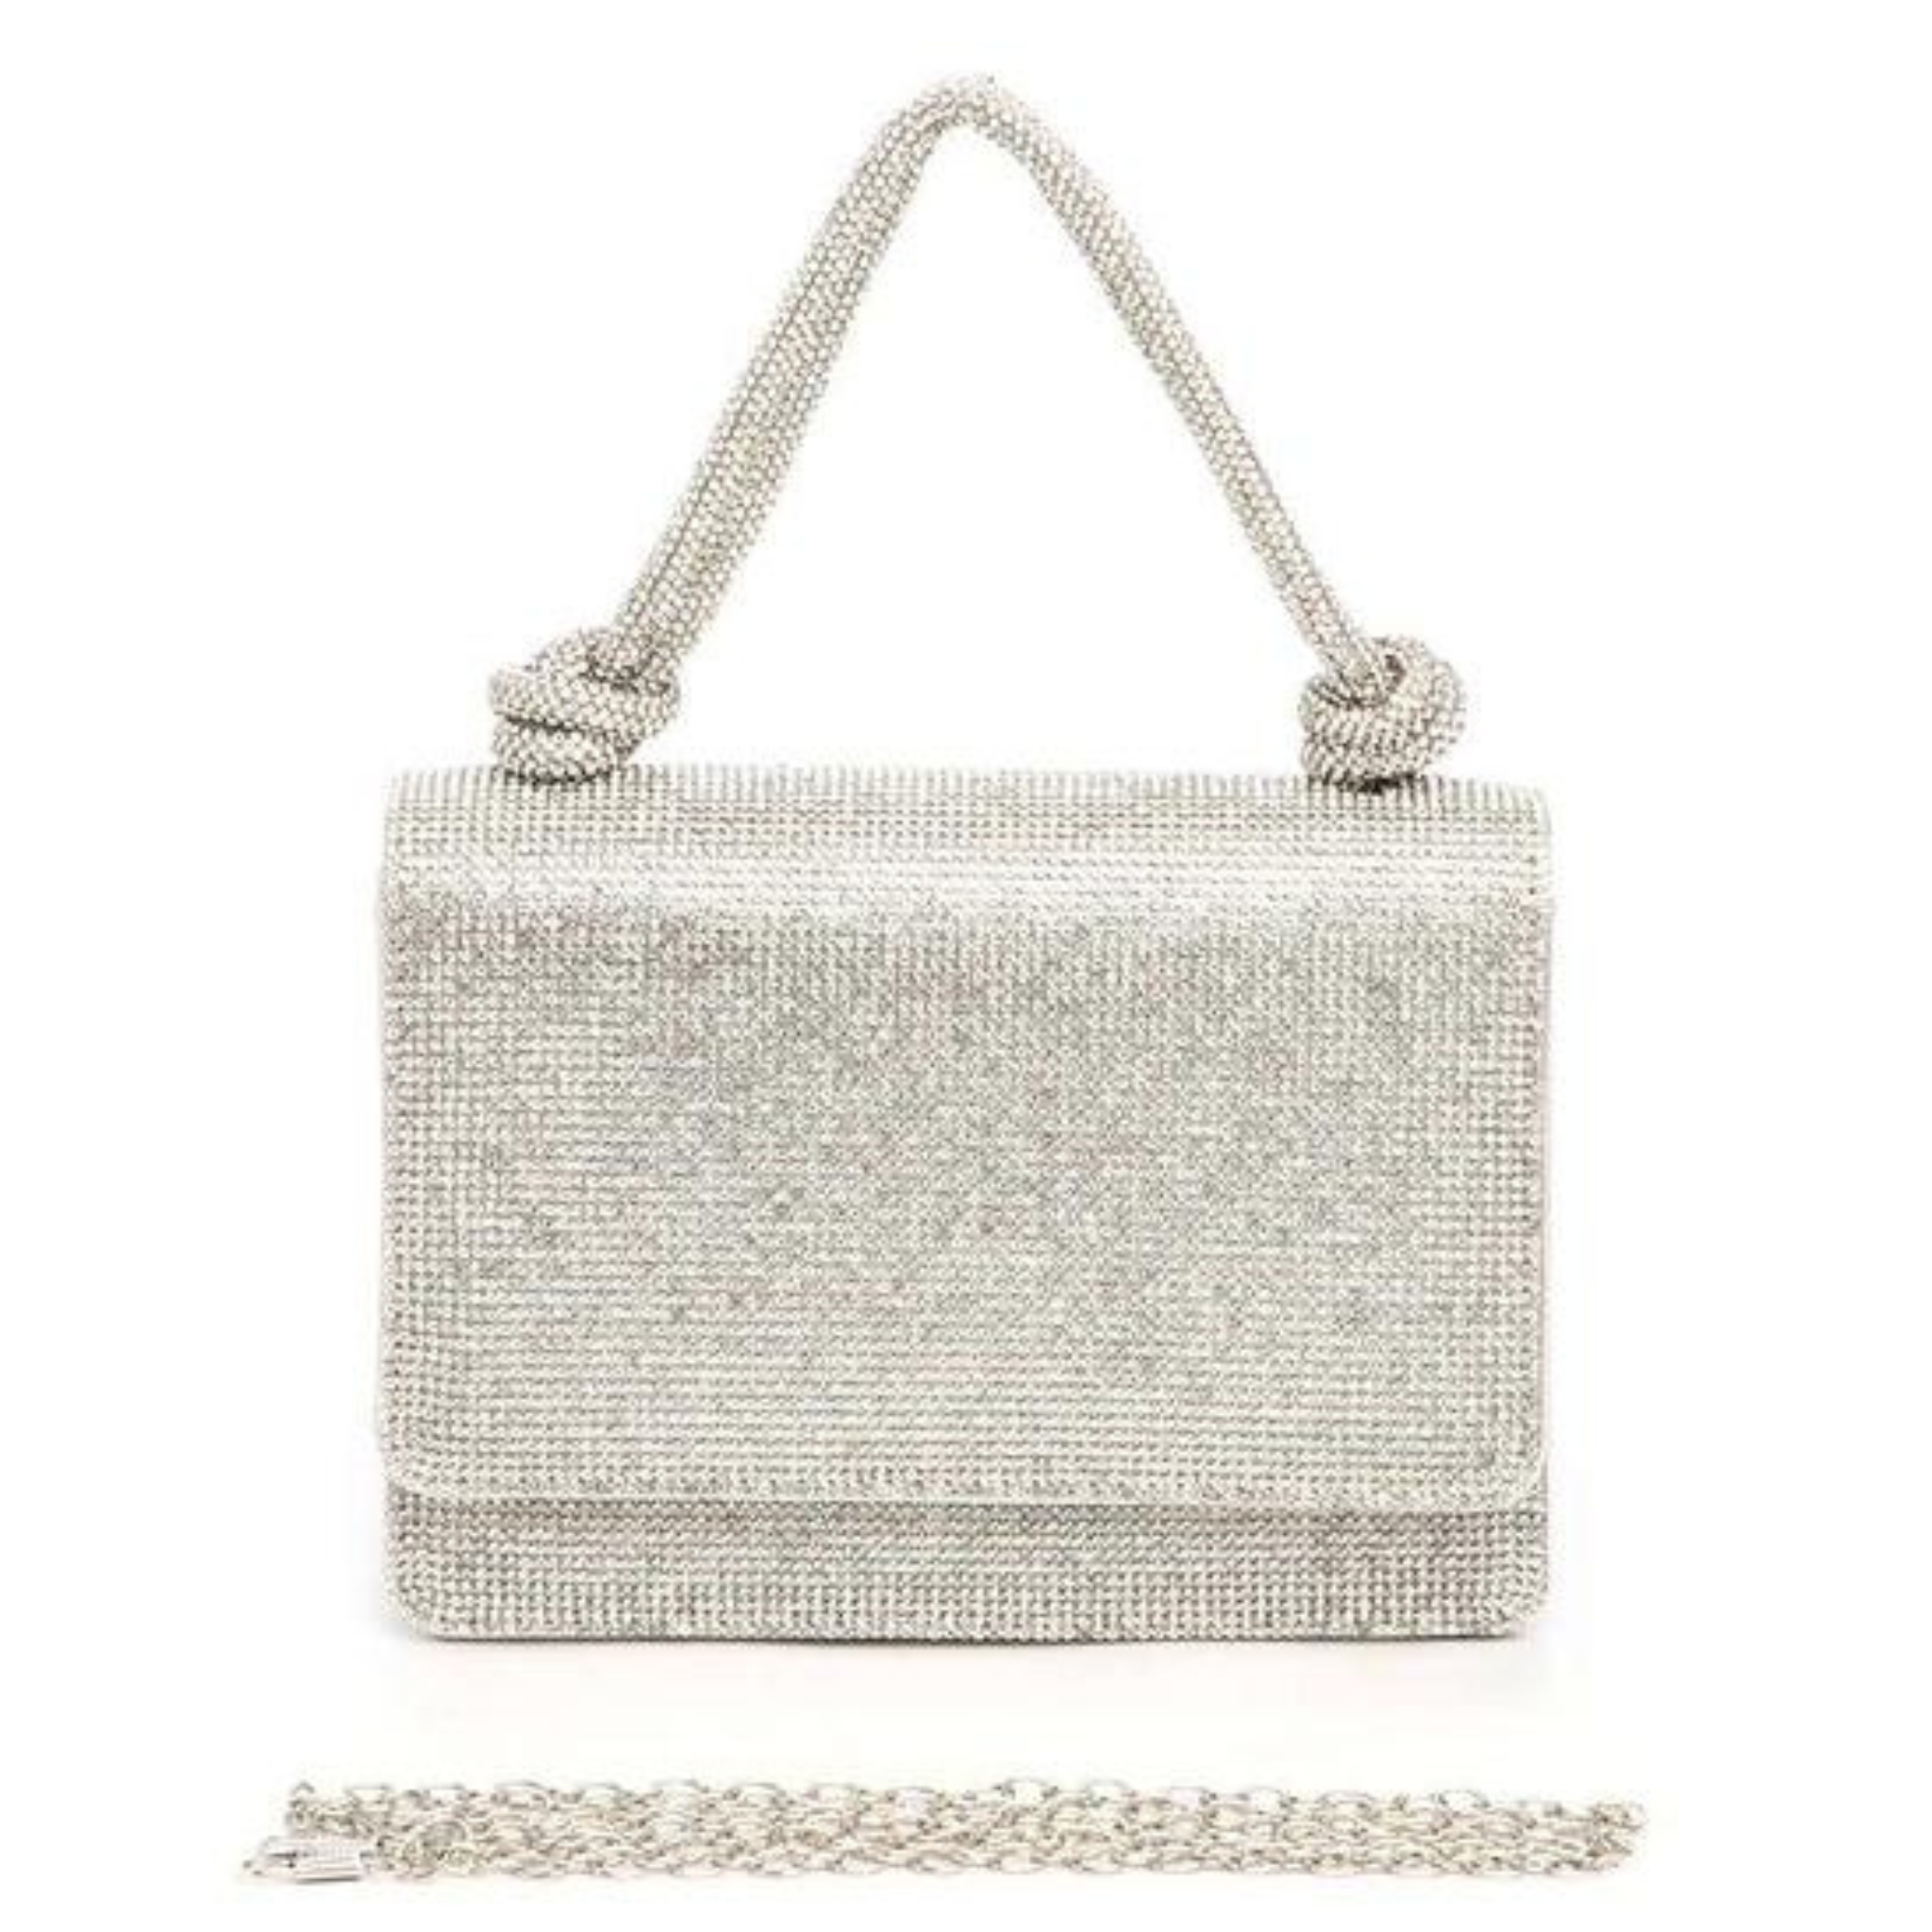 Rhinestone Top Handle Small Party Clutch